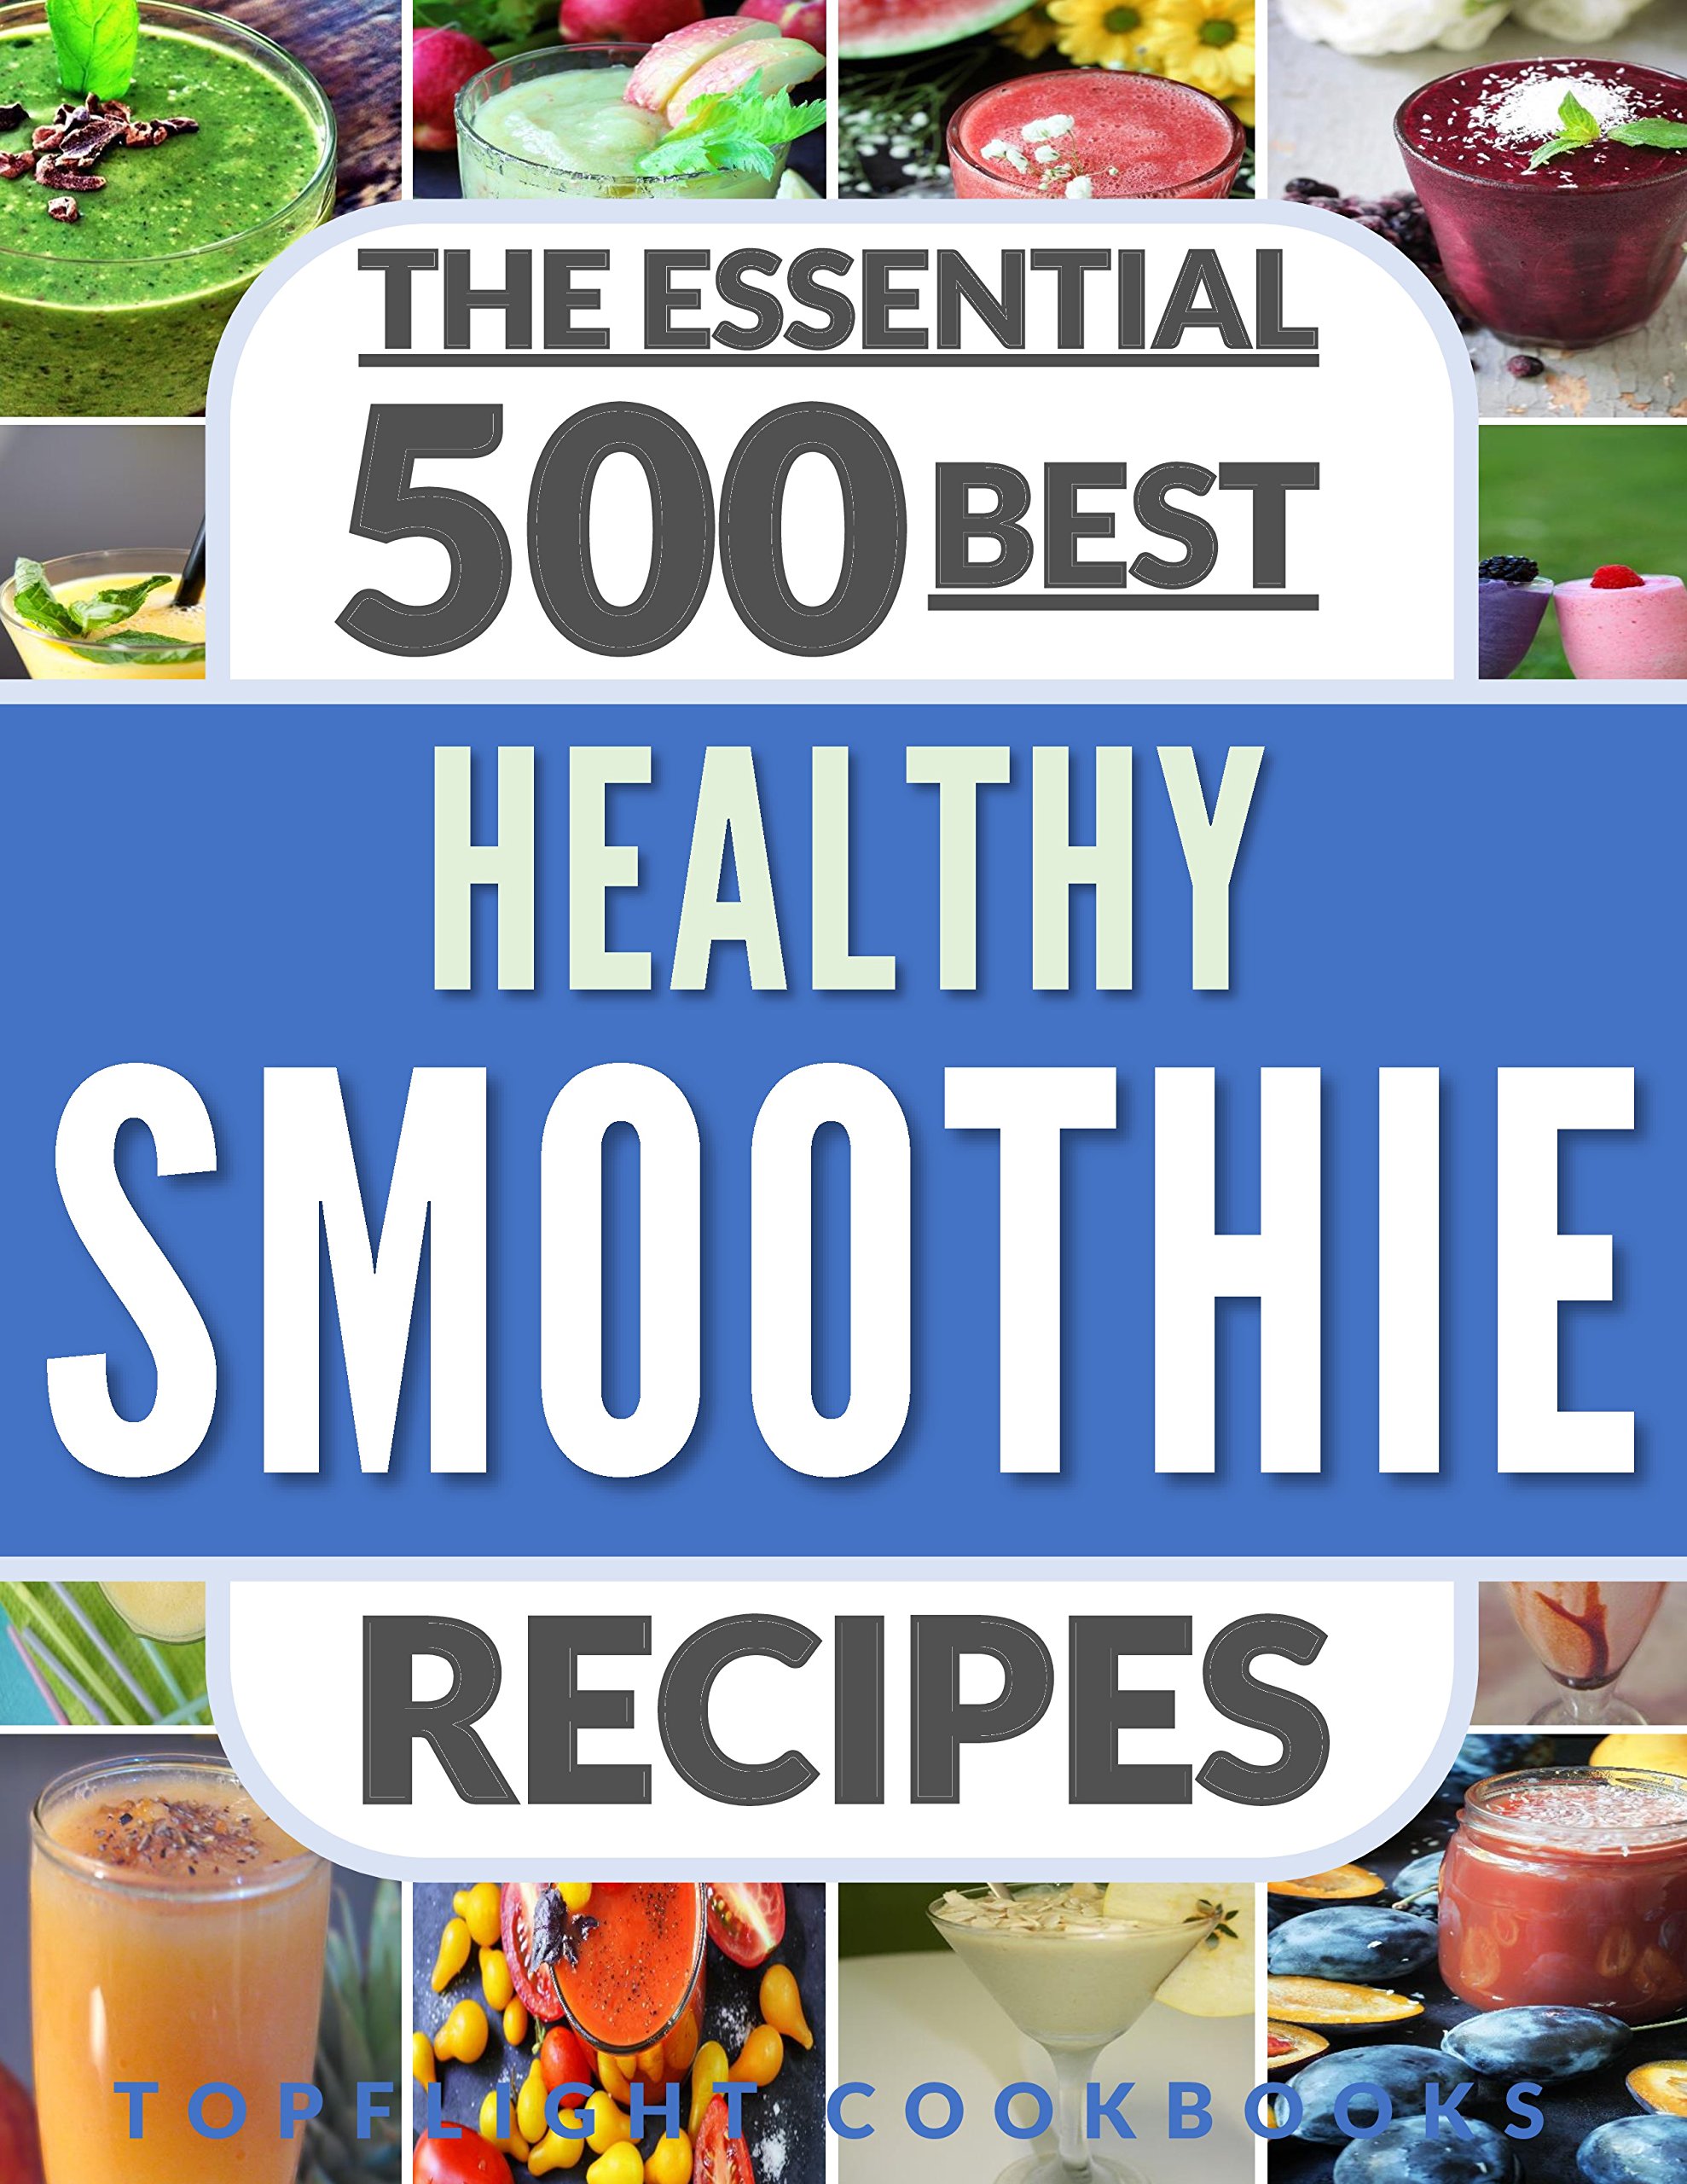 SMOOTHIES: Top 500 Healthy Smoothie Recipes (smoothie, smoothie recipes, smoothies for weight loss, green smoothies, smoothie detox, smoothie cleanse, smoothies for diabetics, smoothies for kids)